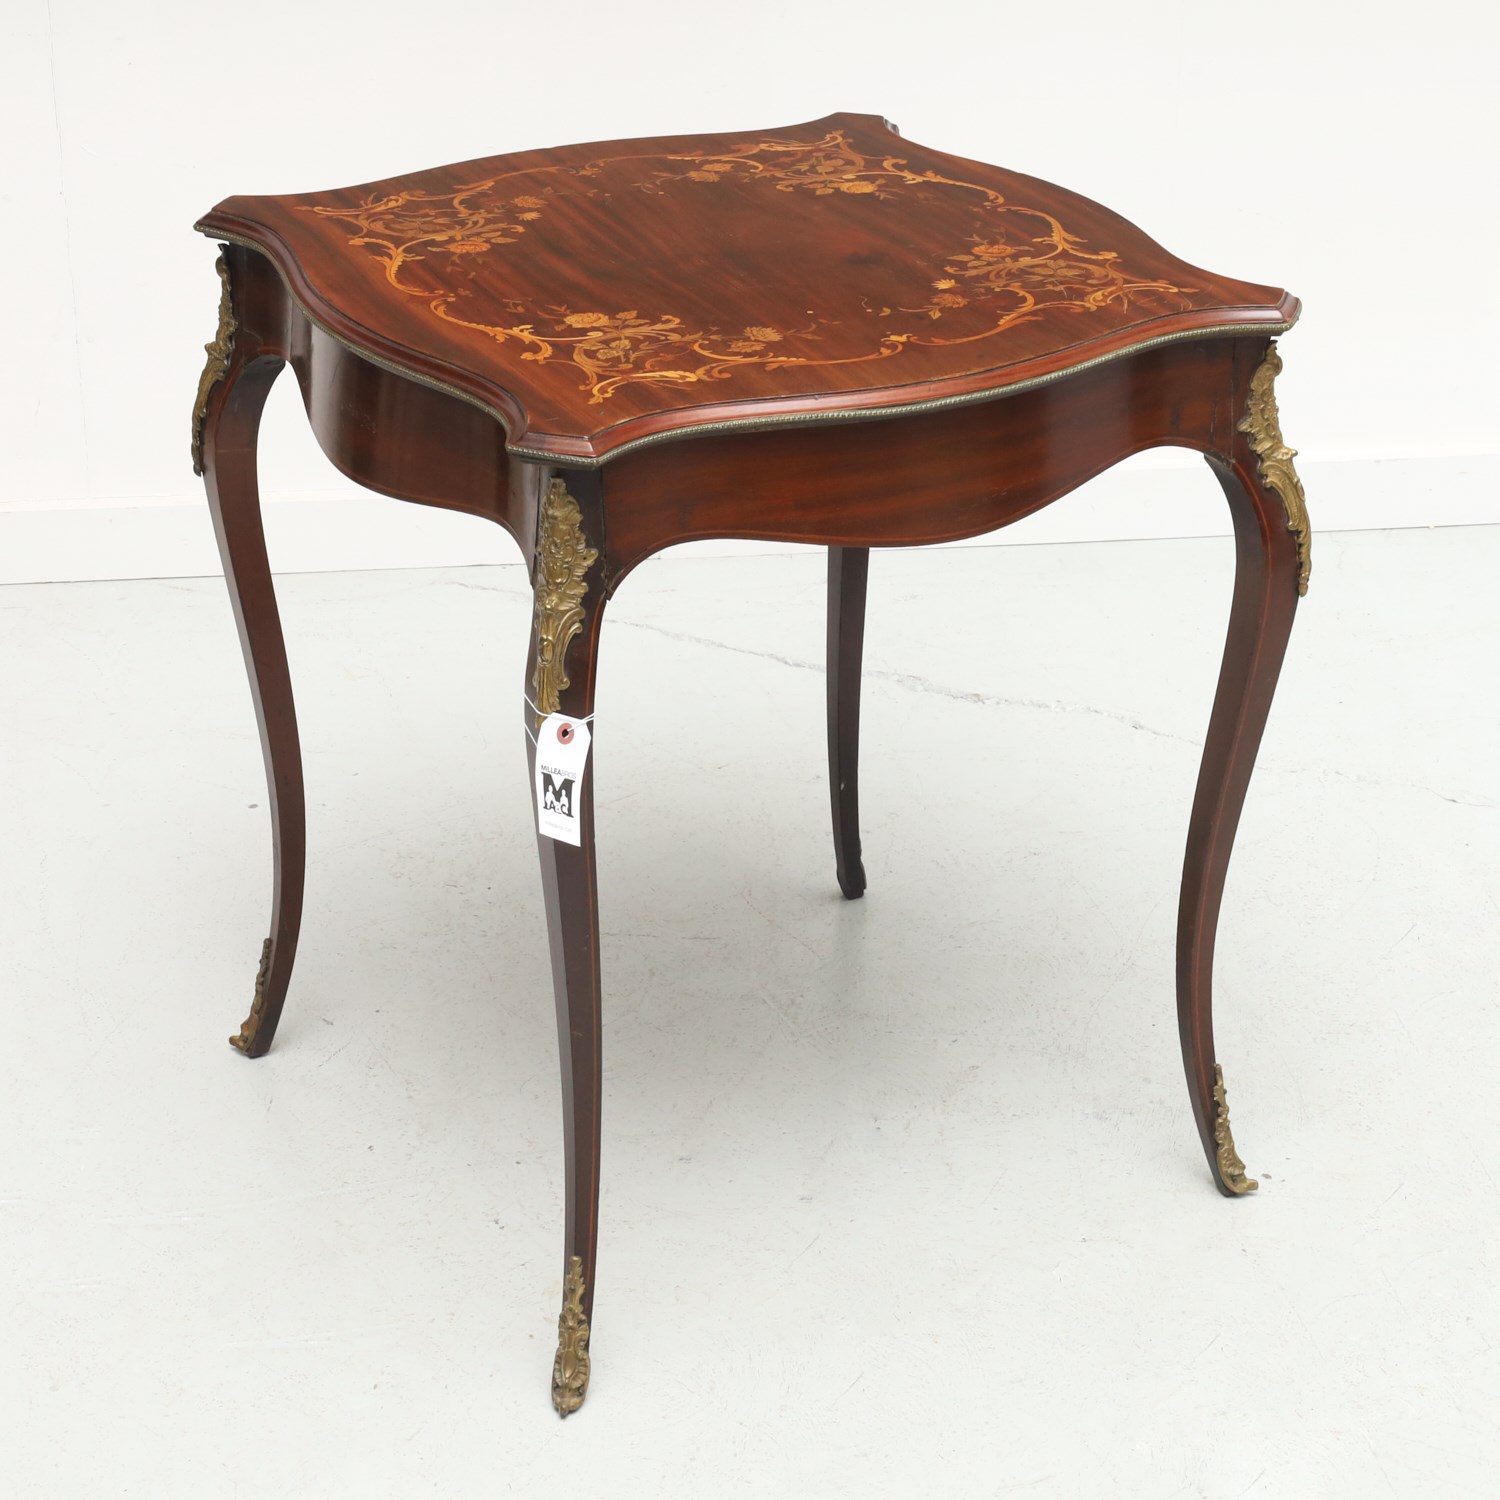 LOUIS XV STYLE MARQUETRY INLAID 361e37